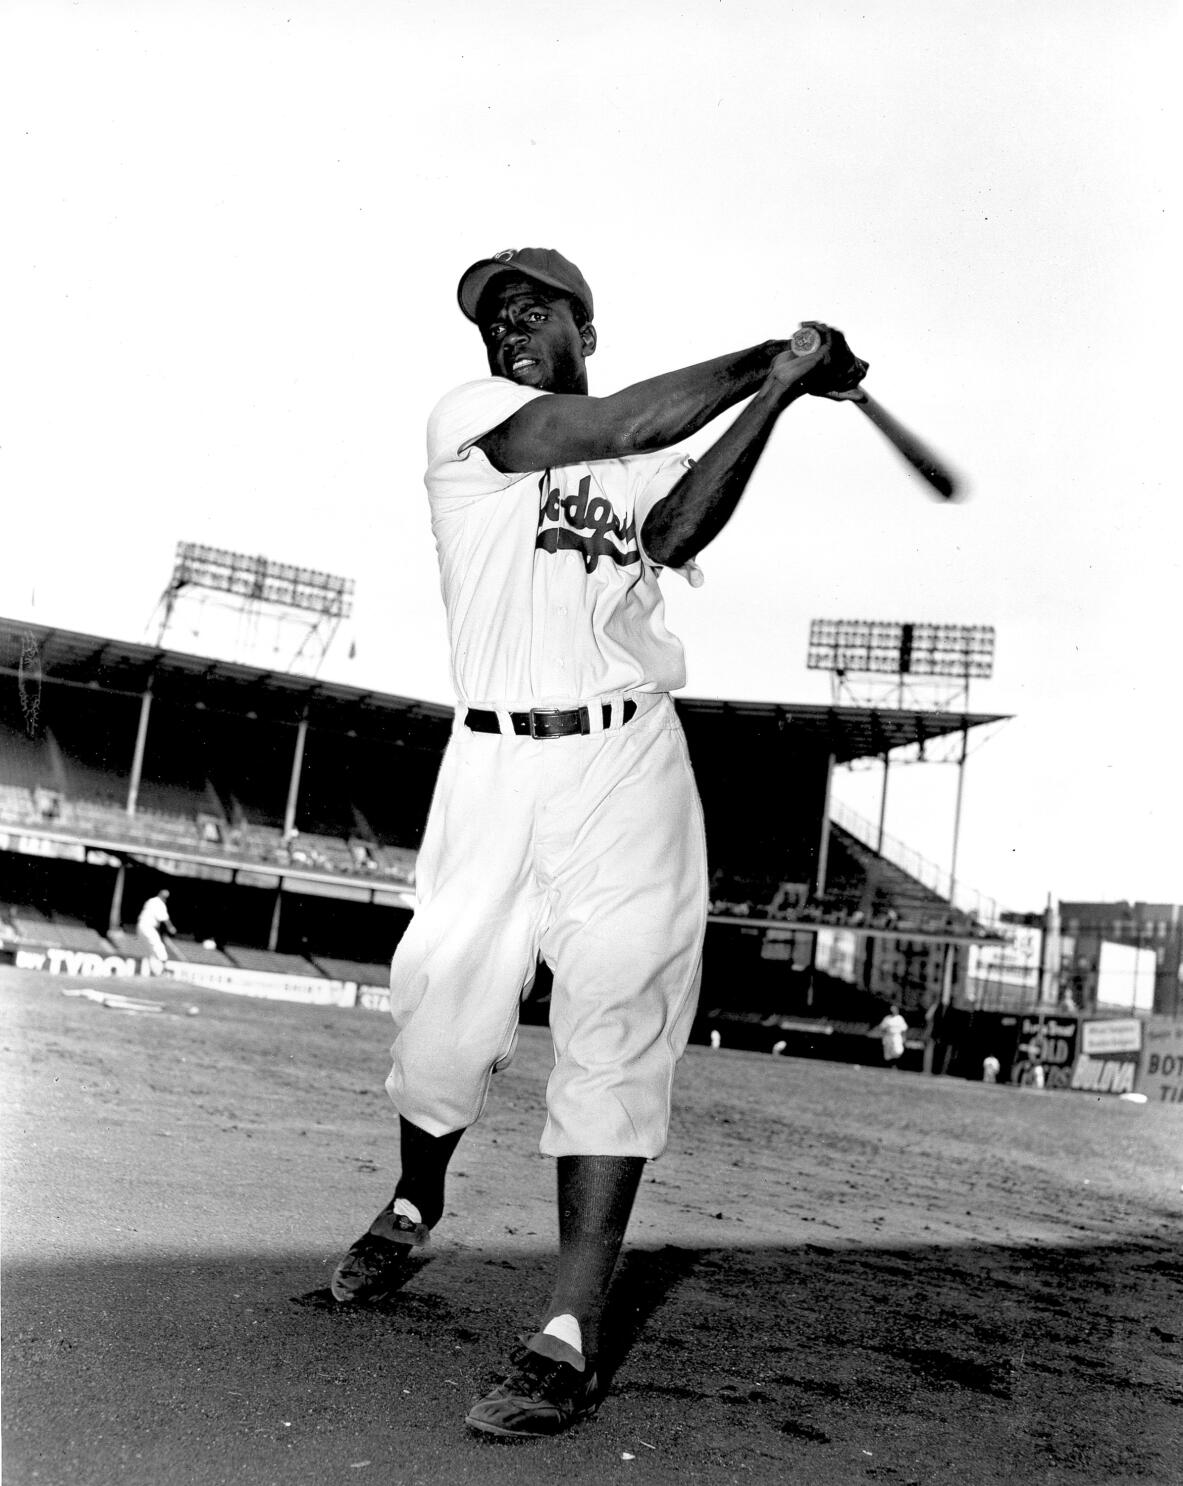 Jackie Robinson Celebrated Amid Decline of Black Players in MLB